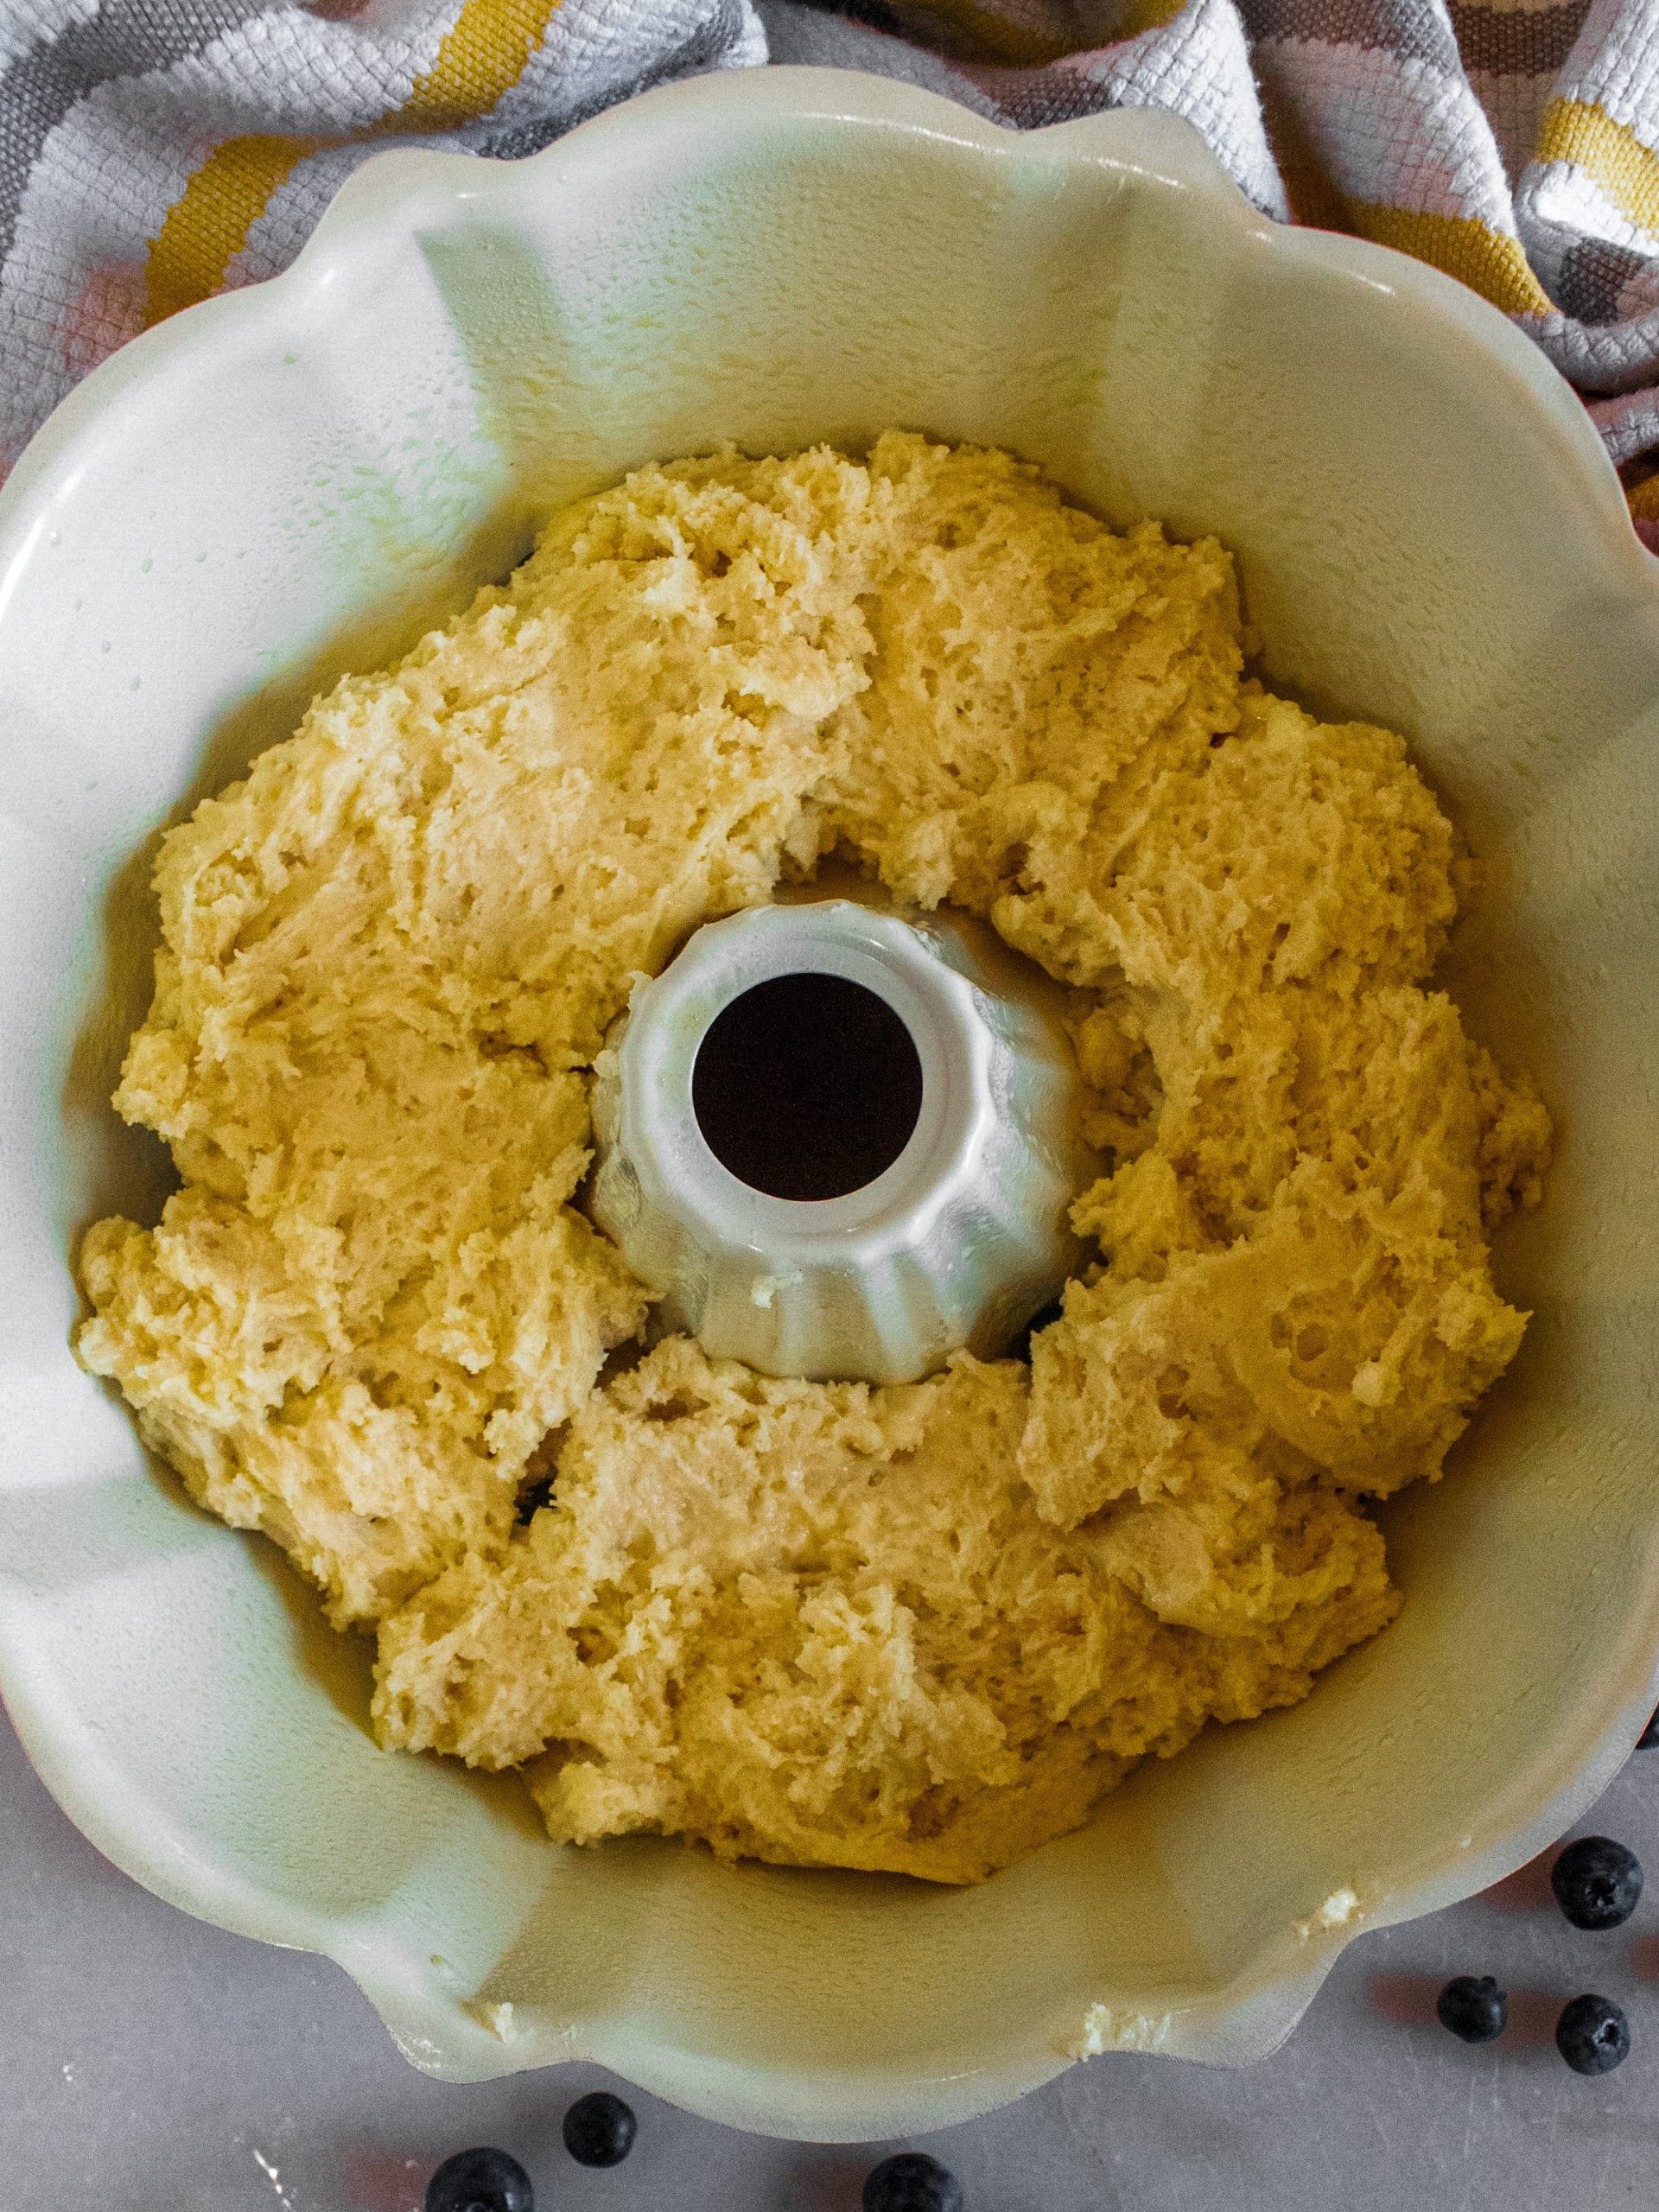 Prepare bundt pan by spraying with non-stick cooking spray. Place half the cake batter in the pan and pat down along the center, making a dent to place the filling into.